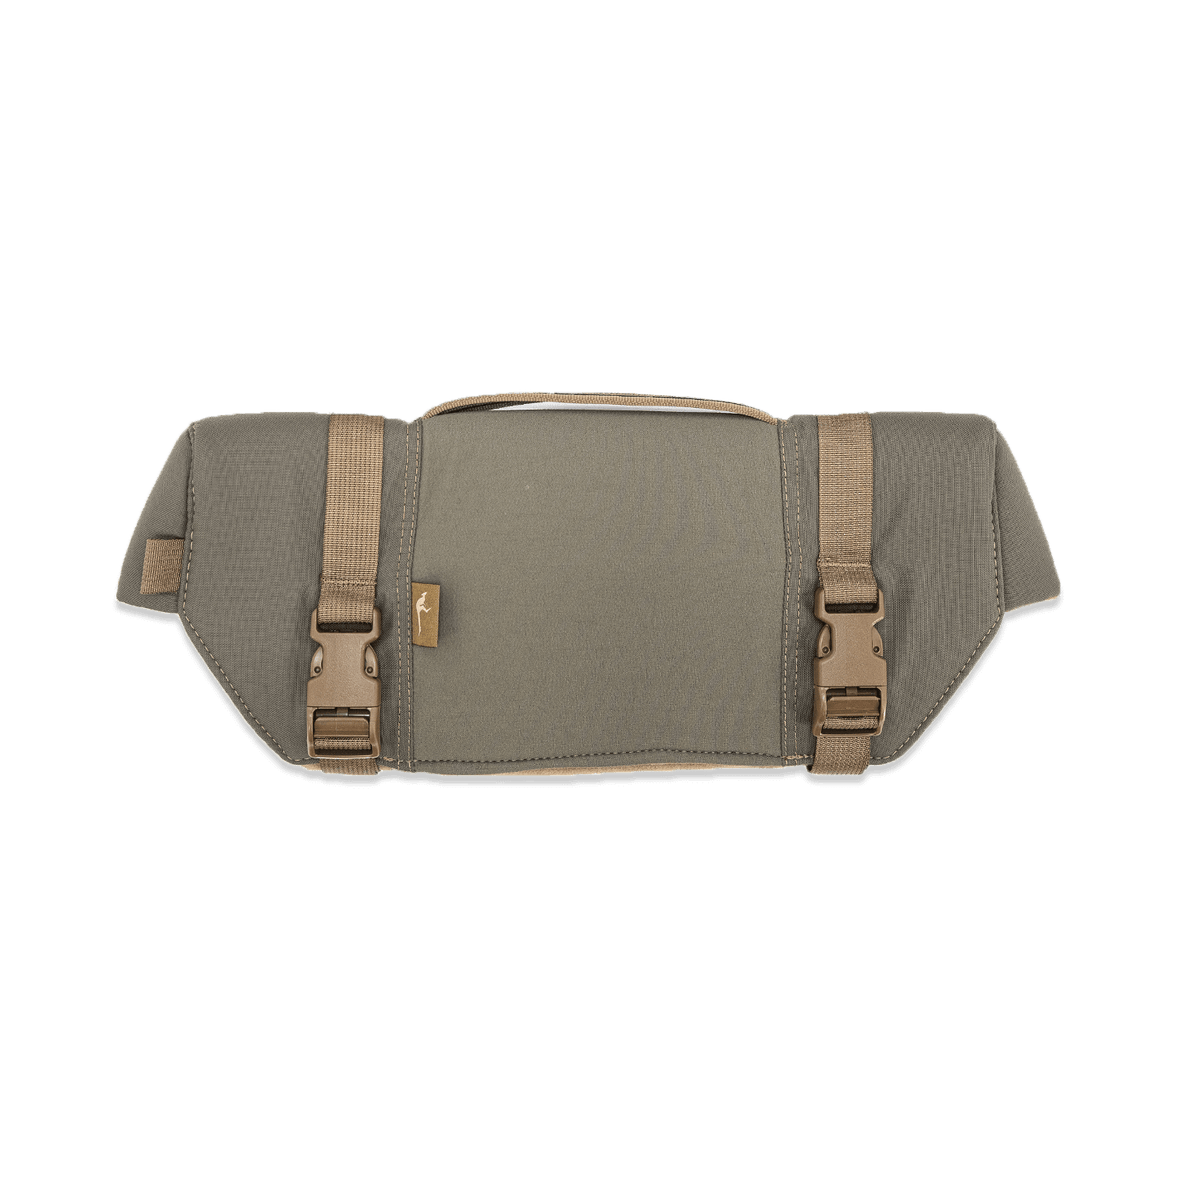 padded scope cover